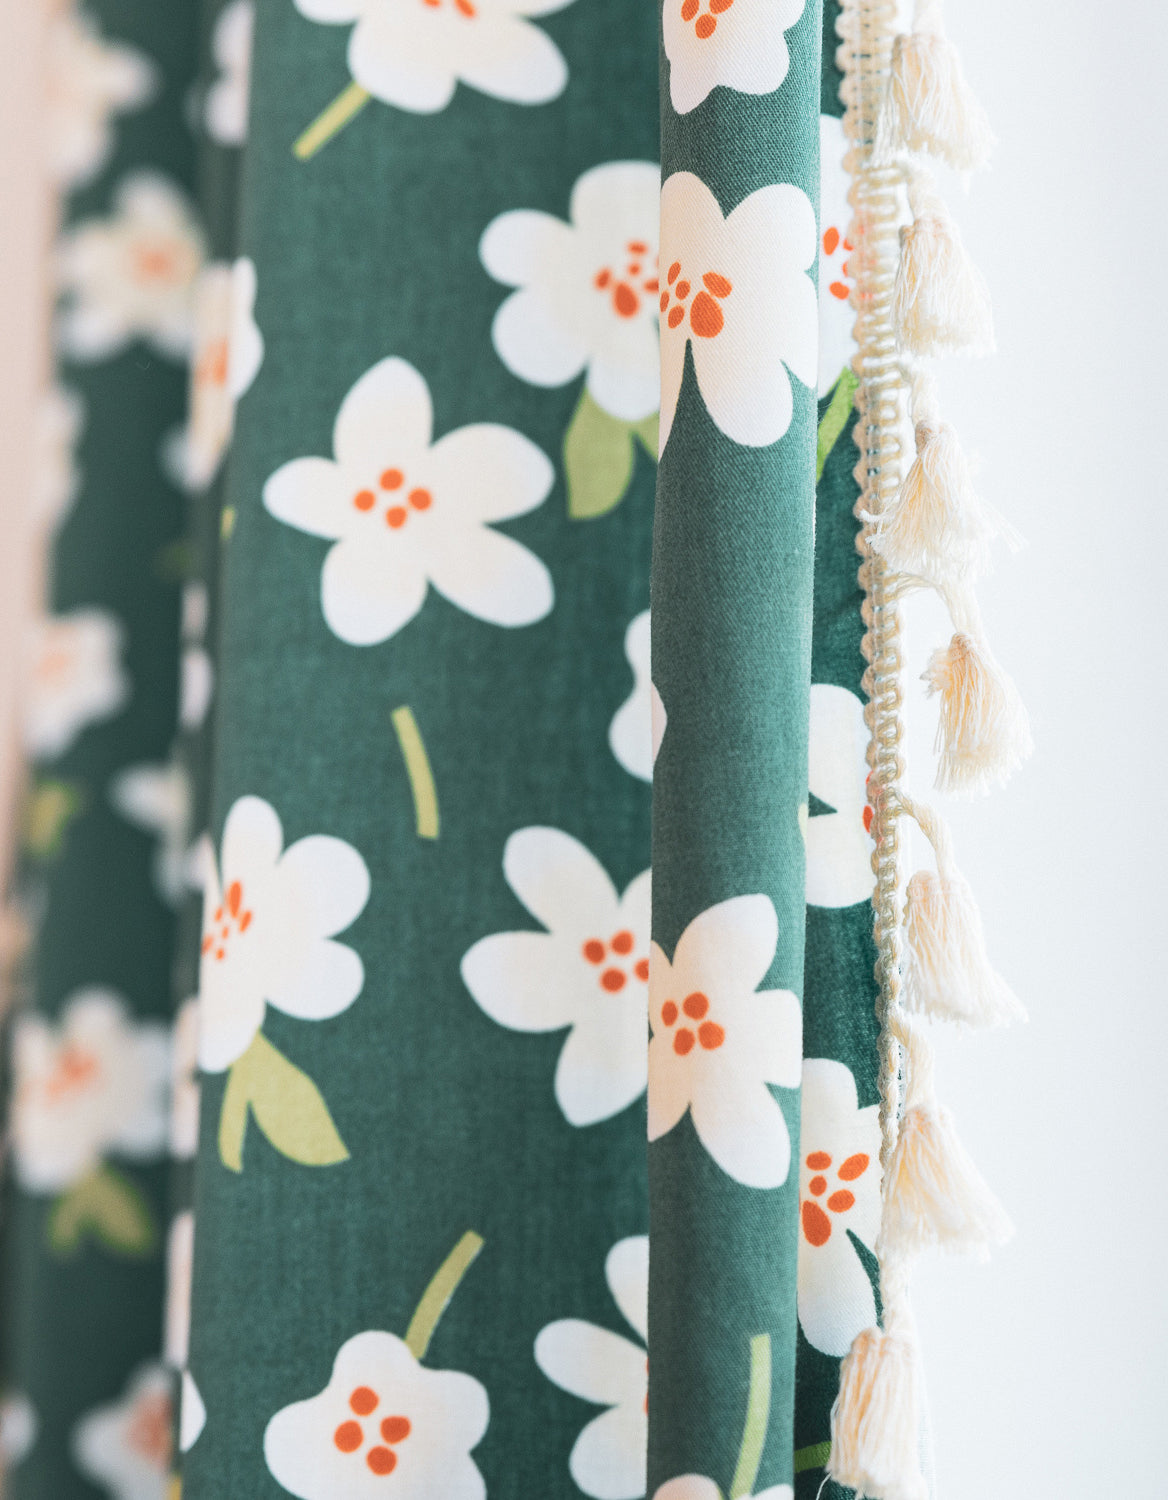 Summer White Flowers Printing Cotton Curtain Green